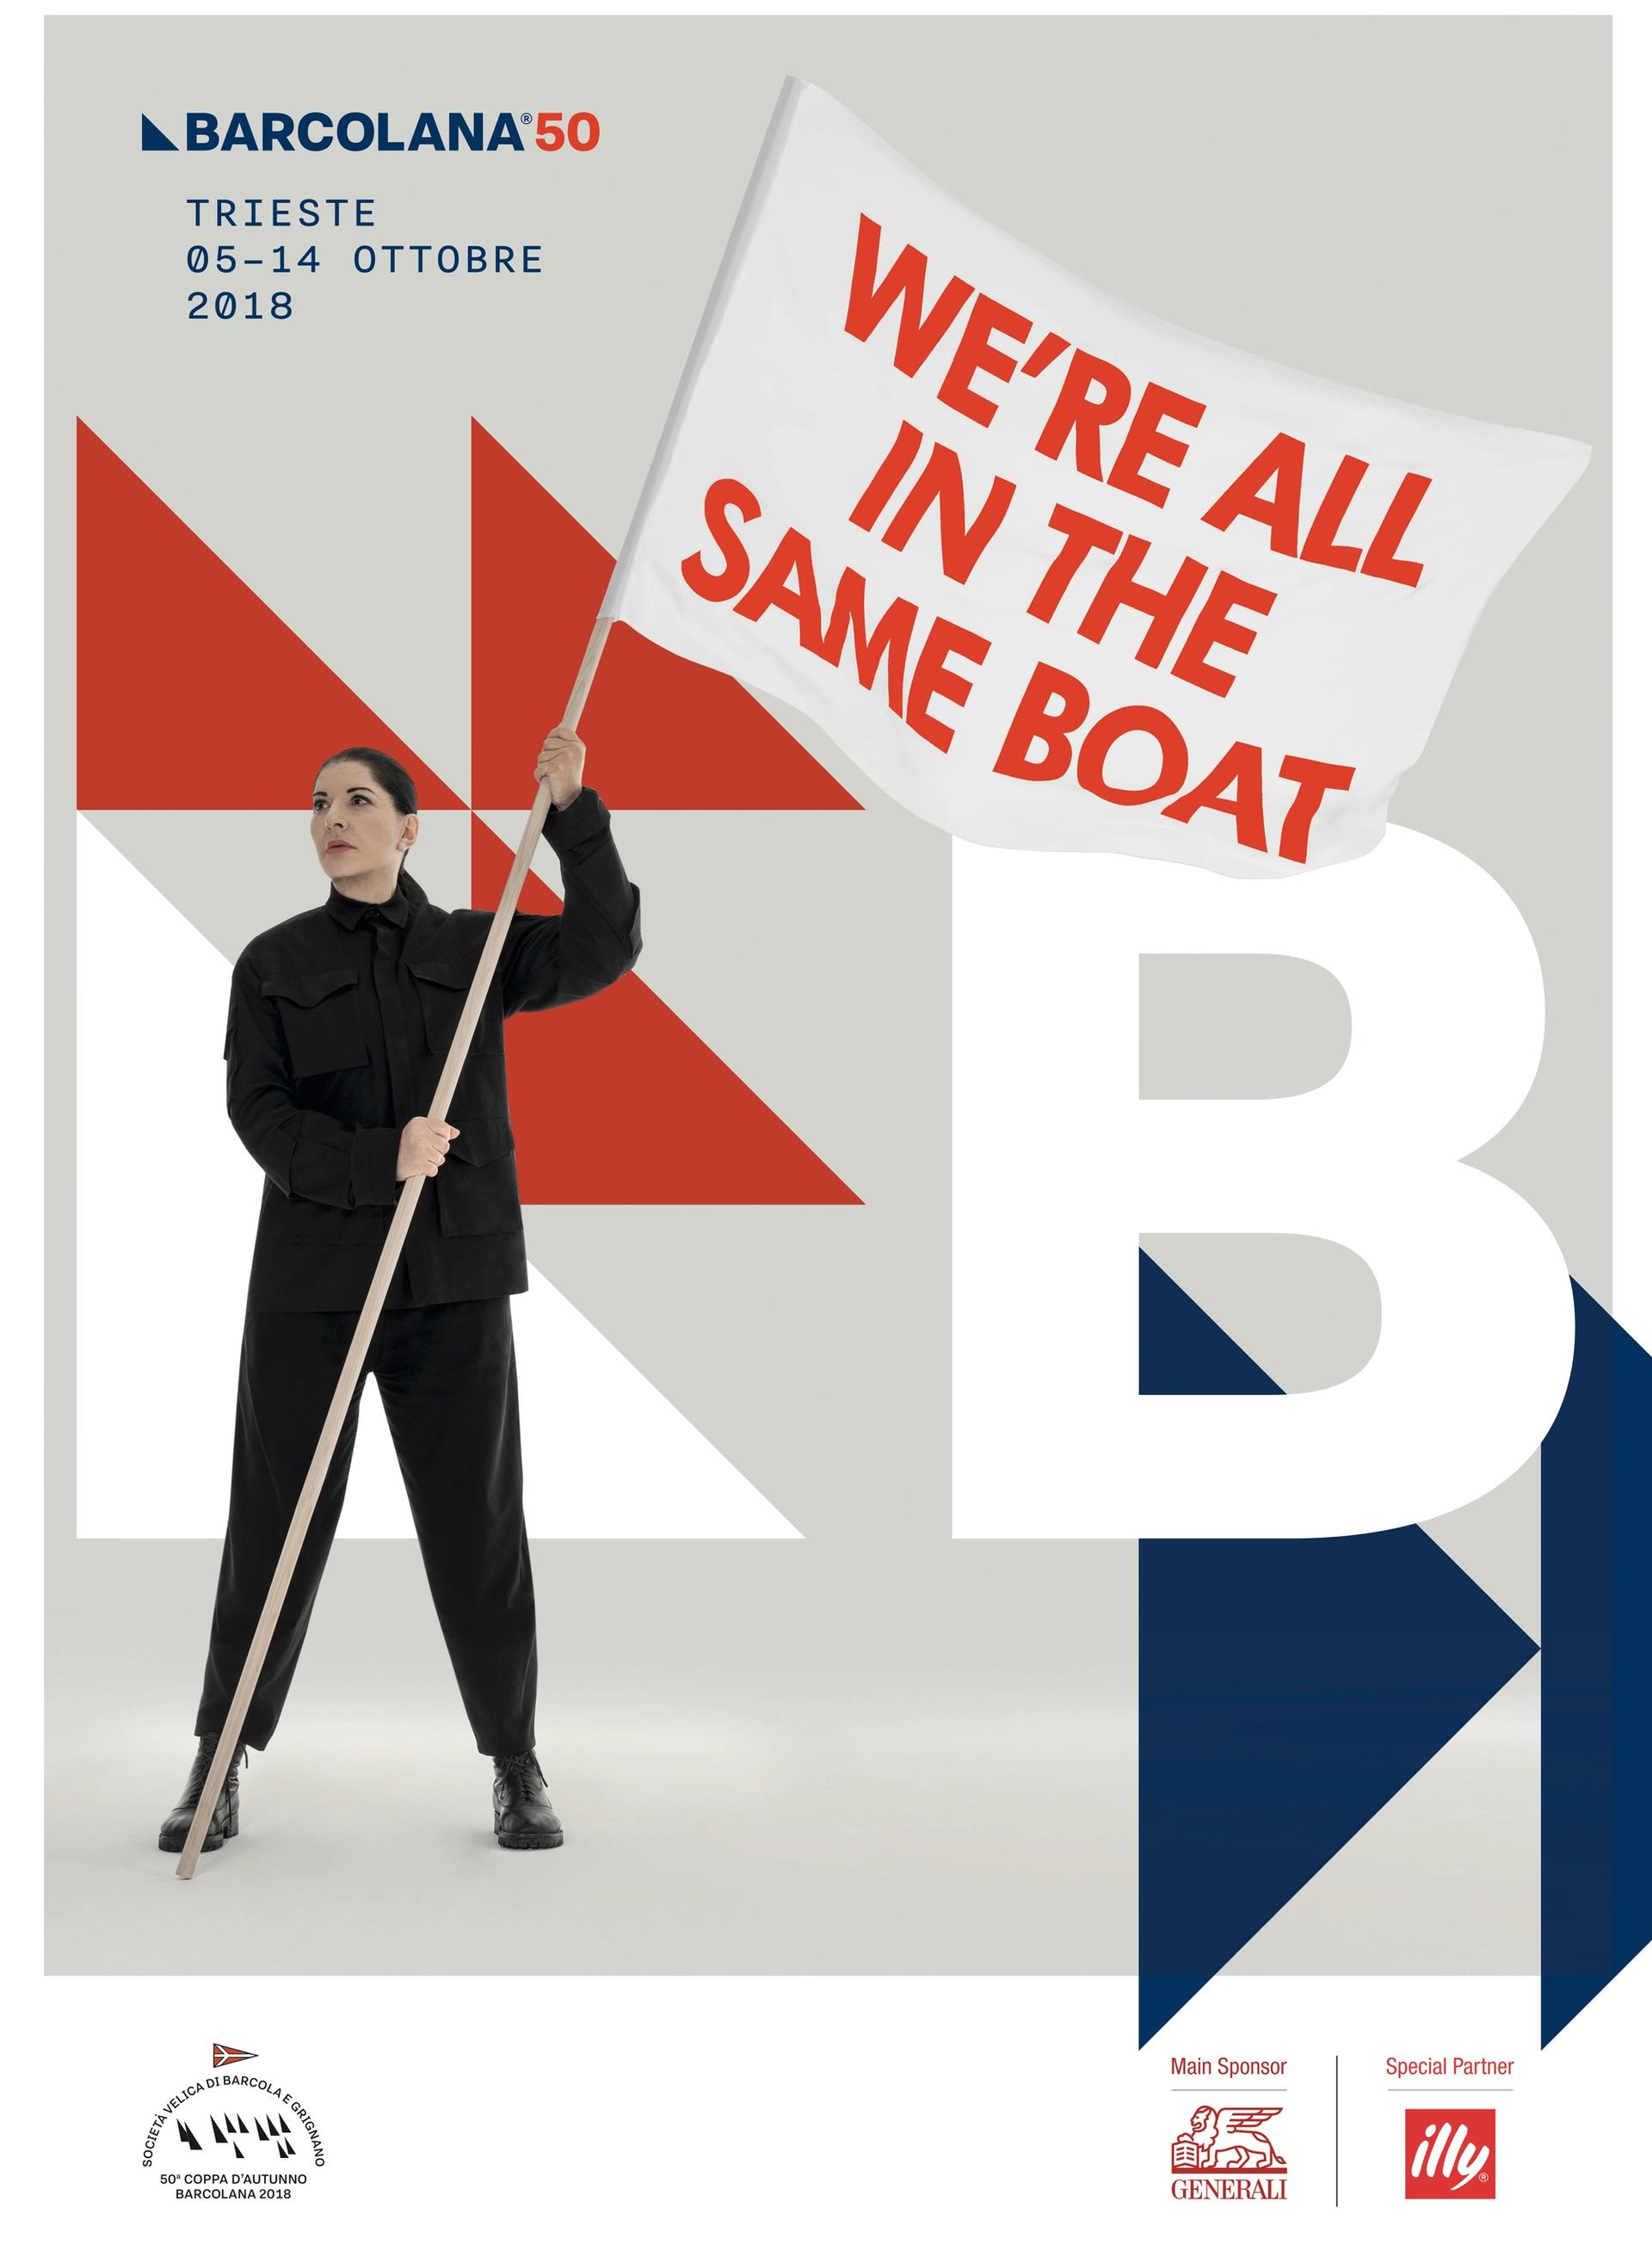 Abramovic's poster has sparked controversy in light of Italy's hard-line stance against migrant rescue ships 